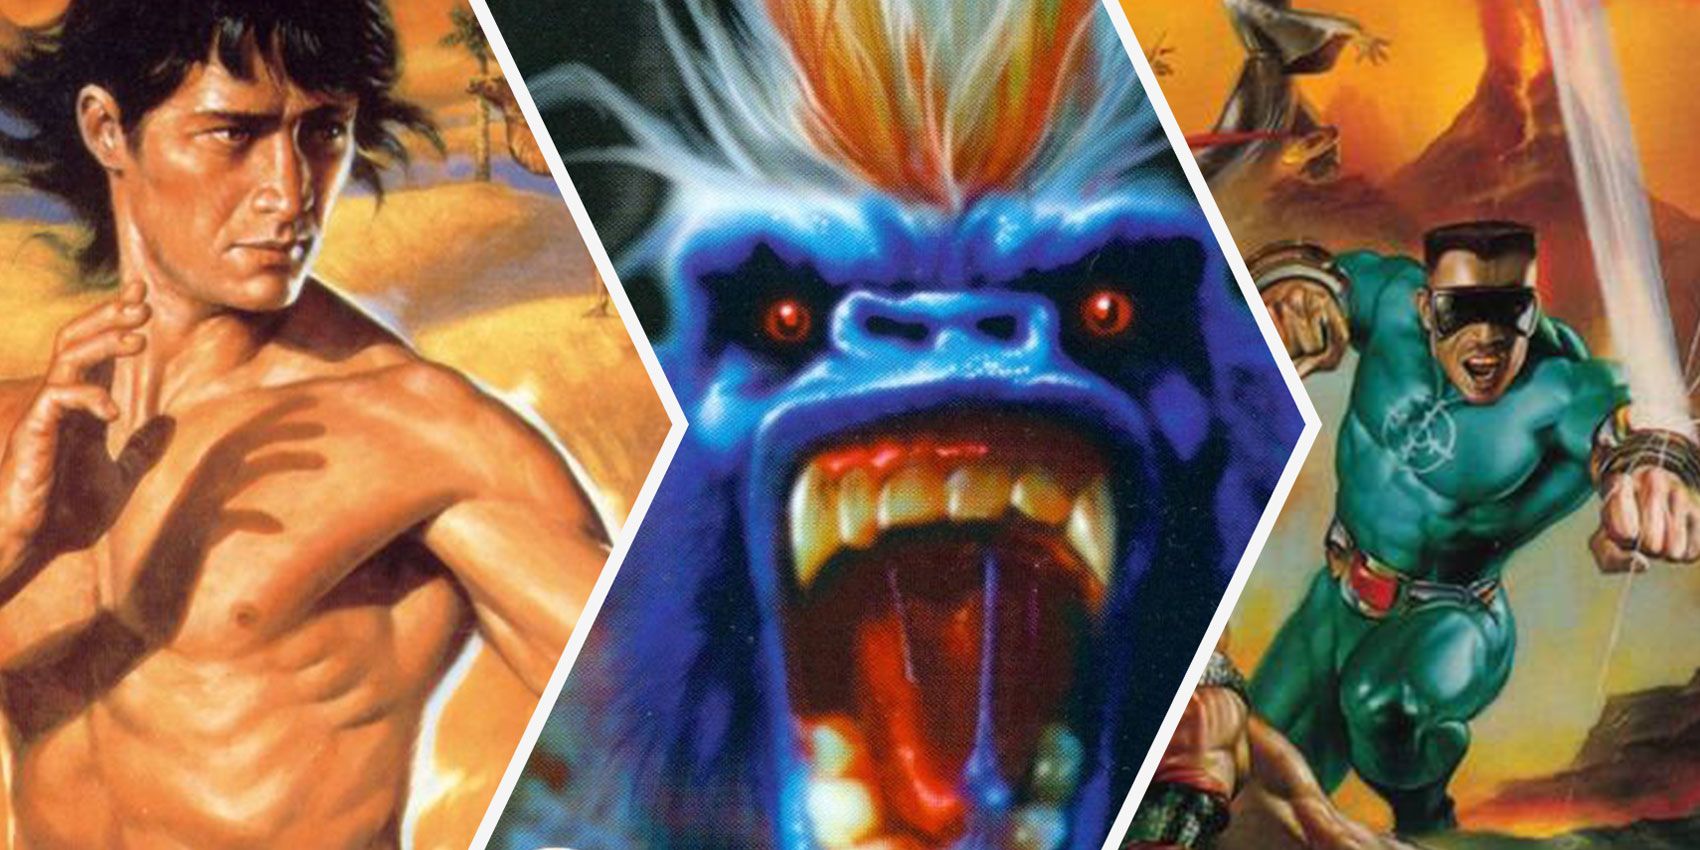 15 Mortal Kombat Knock-Offs That Missed the Mark (And 5 That Are